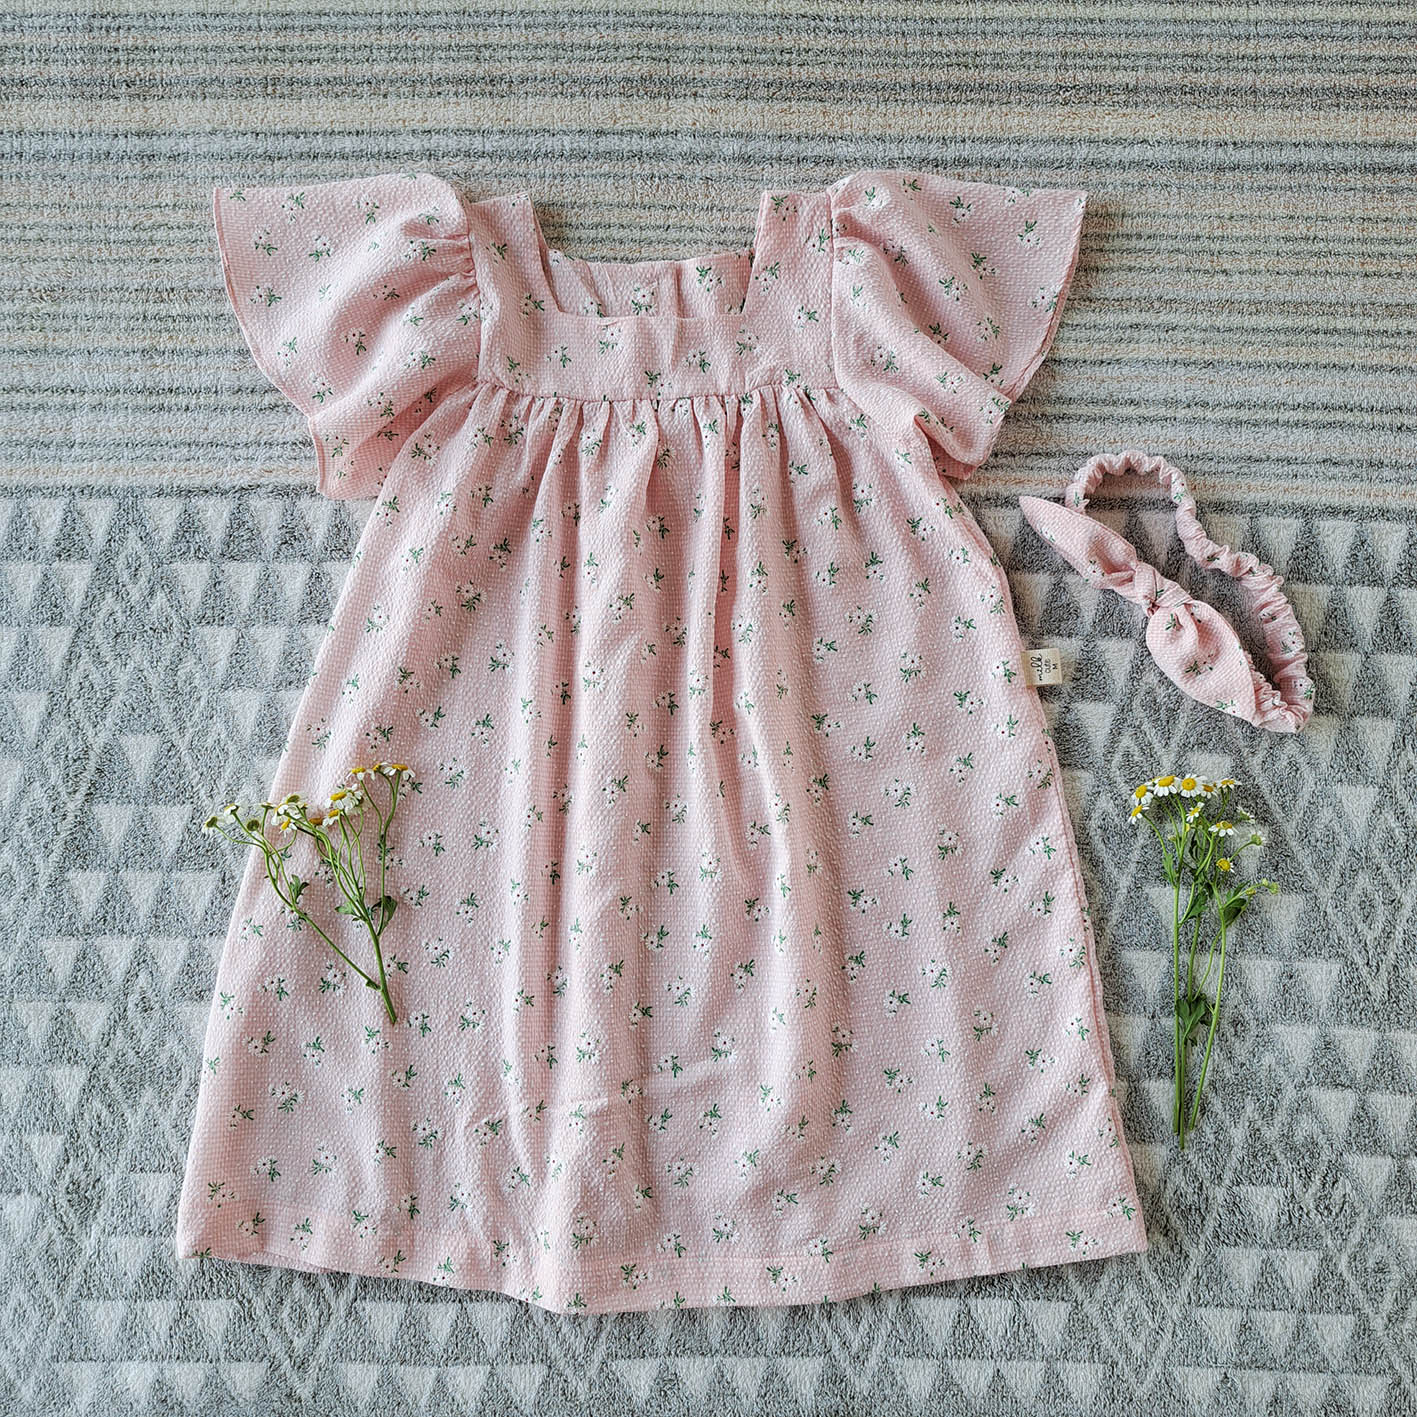 DAISY BUTTERFLY SLEEVES DRESS 100% PRINTED COTTON*HEADBAND NOT INCLUDED*PRE-ORDER SHIP OUT 4-5 FEB